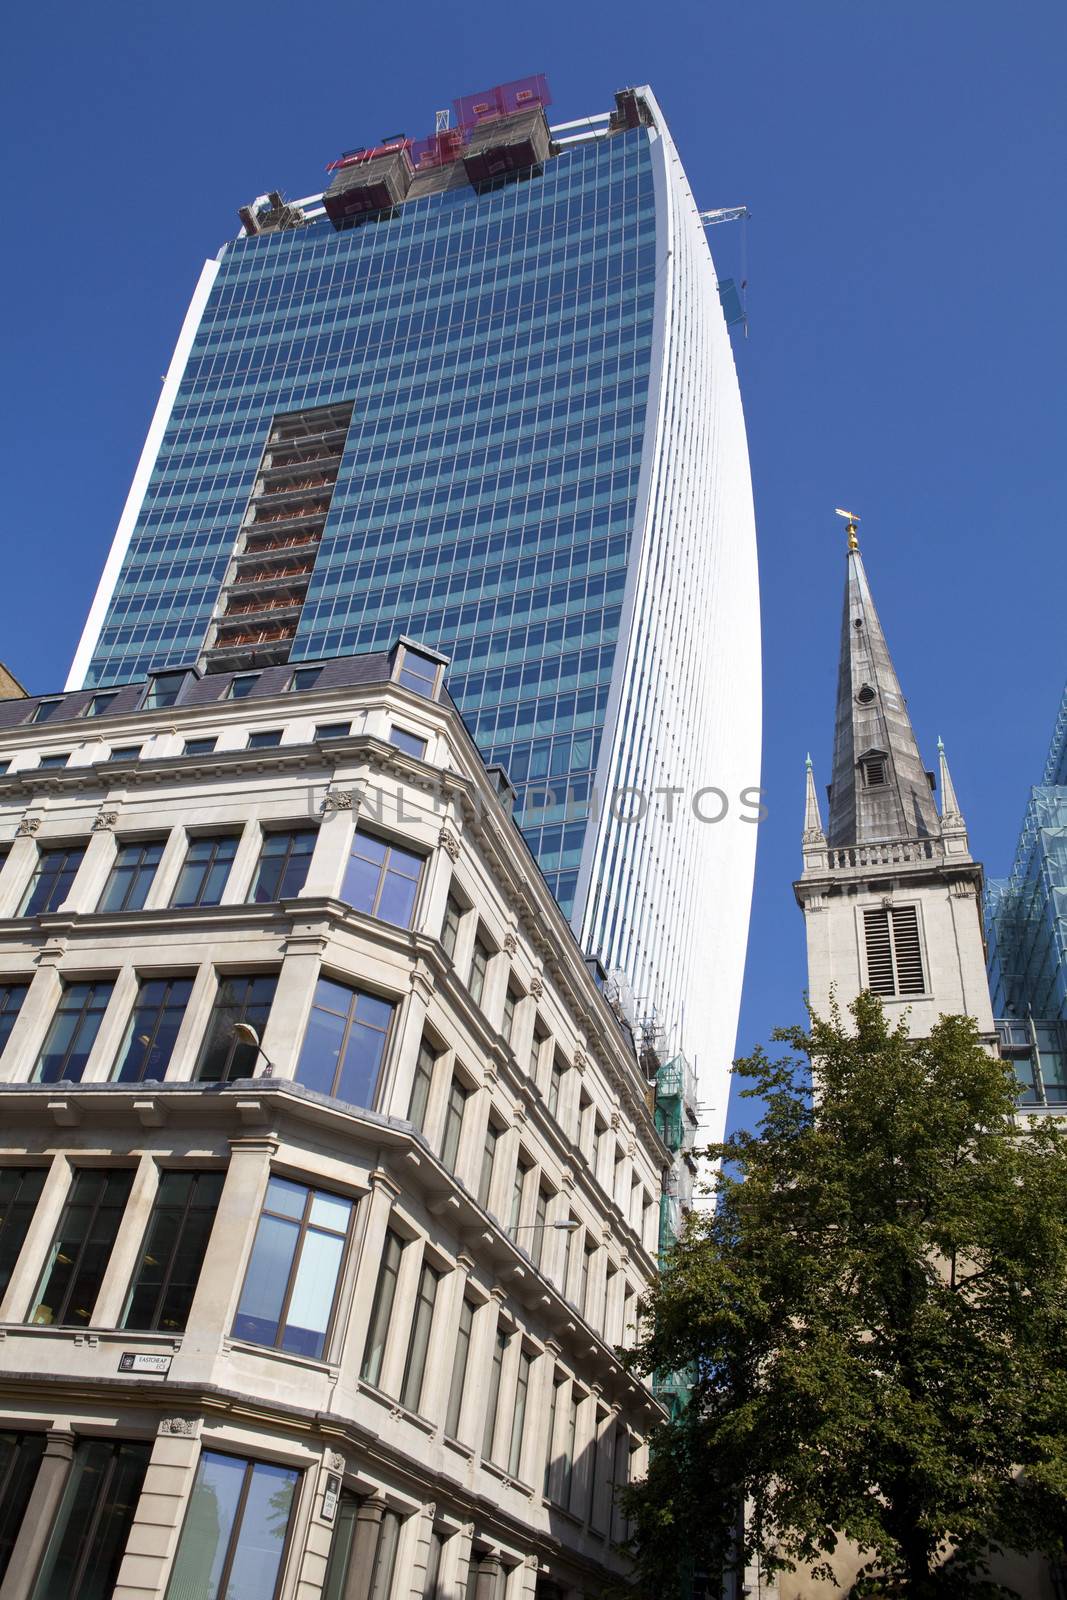 The "Walkie Talkie" building which is currently being constructed at 20 Fenchurch Street in the City of London.